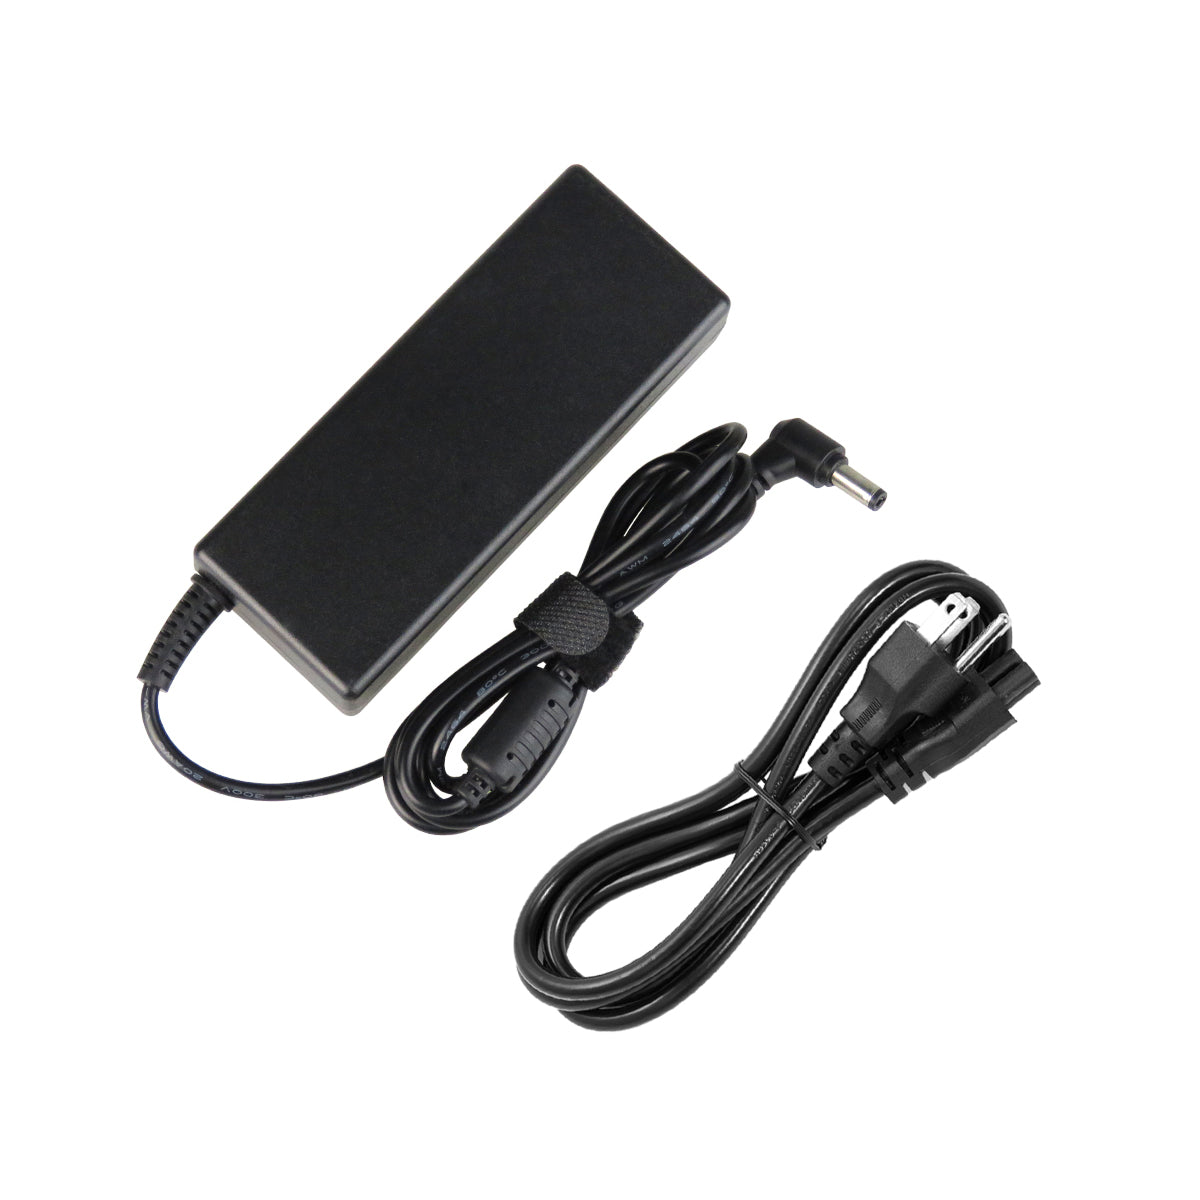 AC Adapter Charger for ASUS N43SL Notebook.